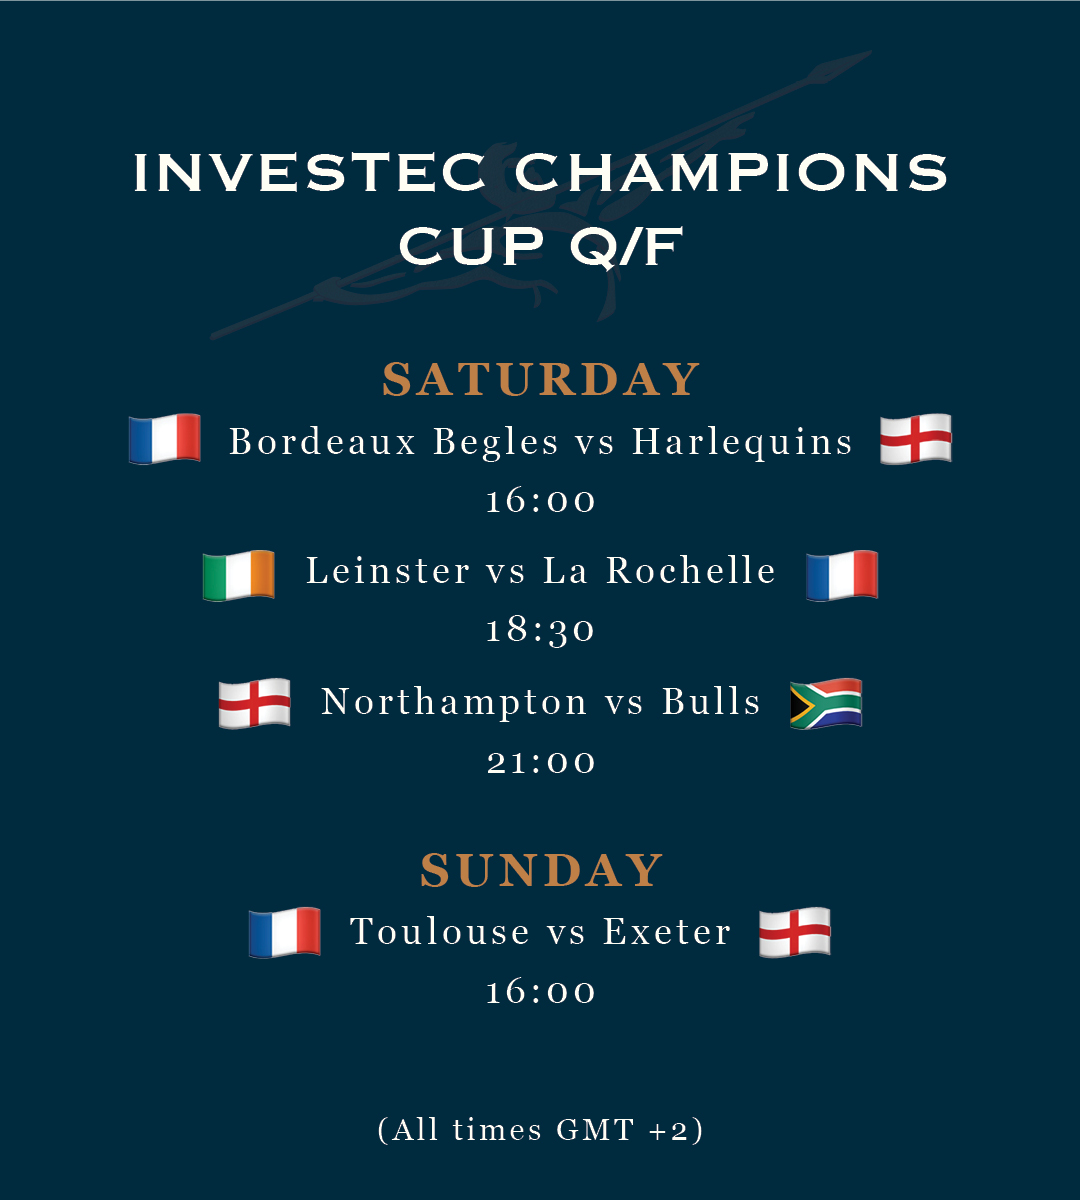 Into the quarter-finals of the Investec Champions Cup this weekend.

Who are you backing for the title this year?

#AvanteBrandy #DareToGoForward #JoinOurTeam #SouthAfricanBrandy #AvanteGuarde